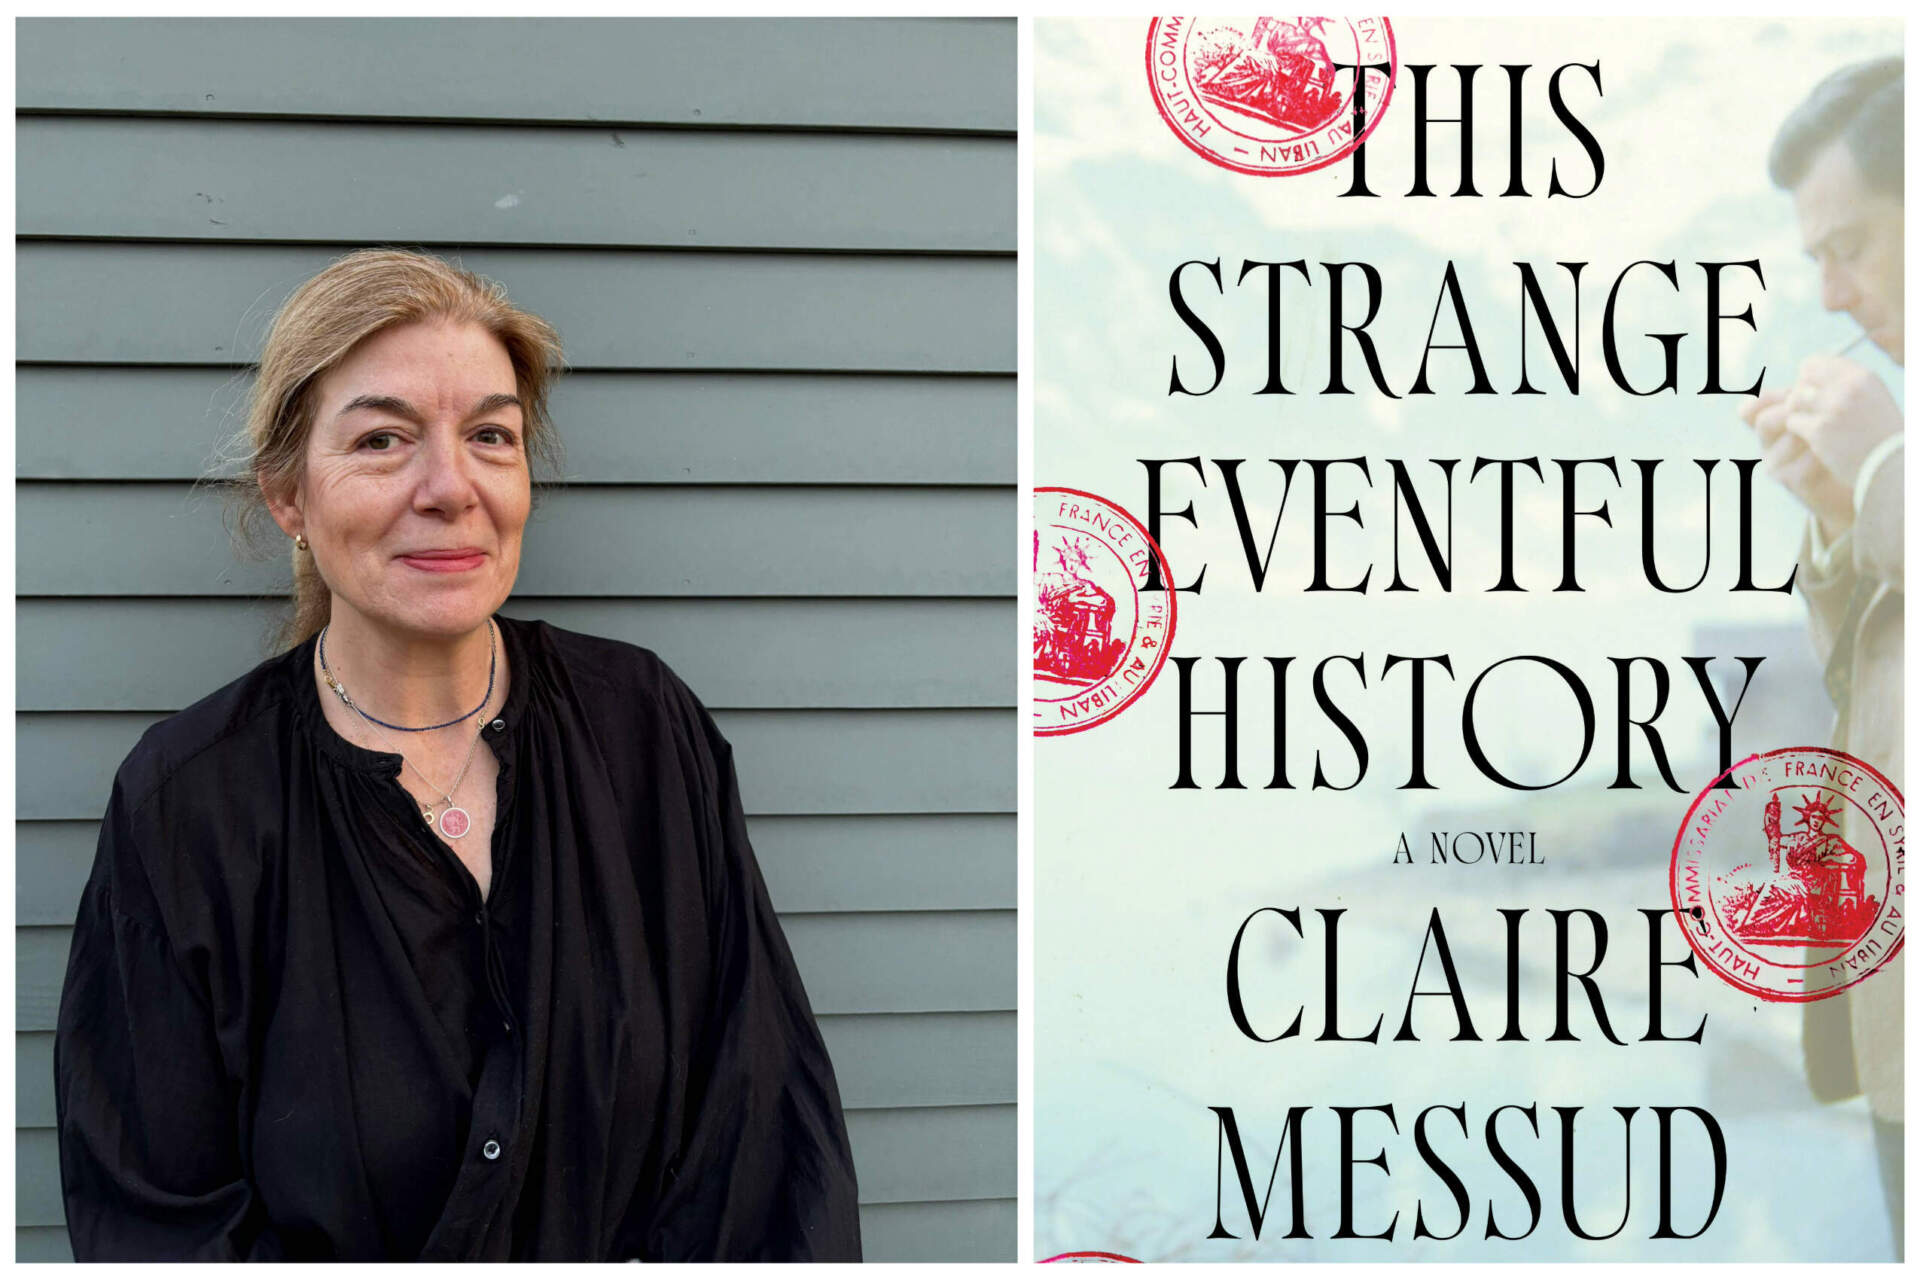 Claire Messud's novel &quot;This Strange Eventful History&quot; is out now. (Author photo courtesy Lucia Wood; book cover courtesy W. W. Norton)